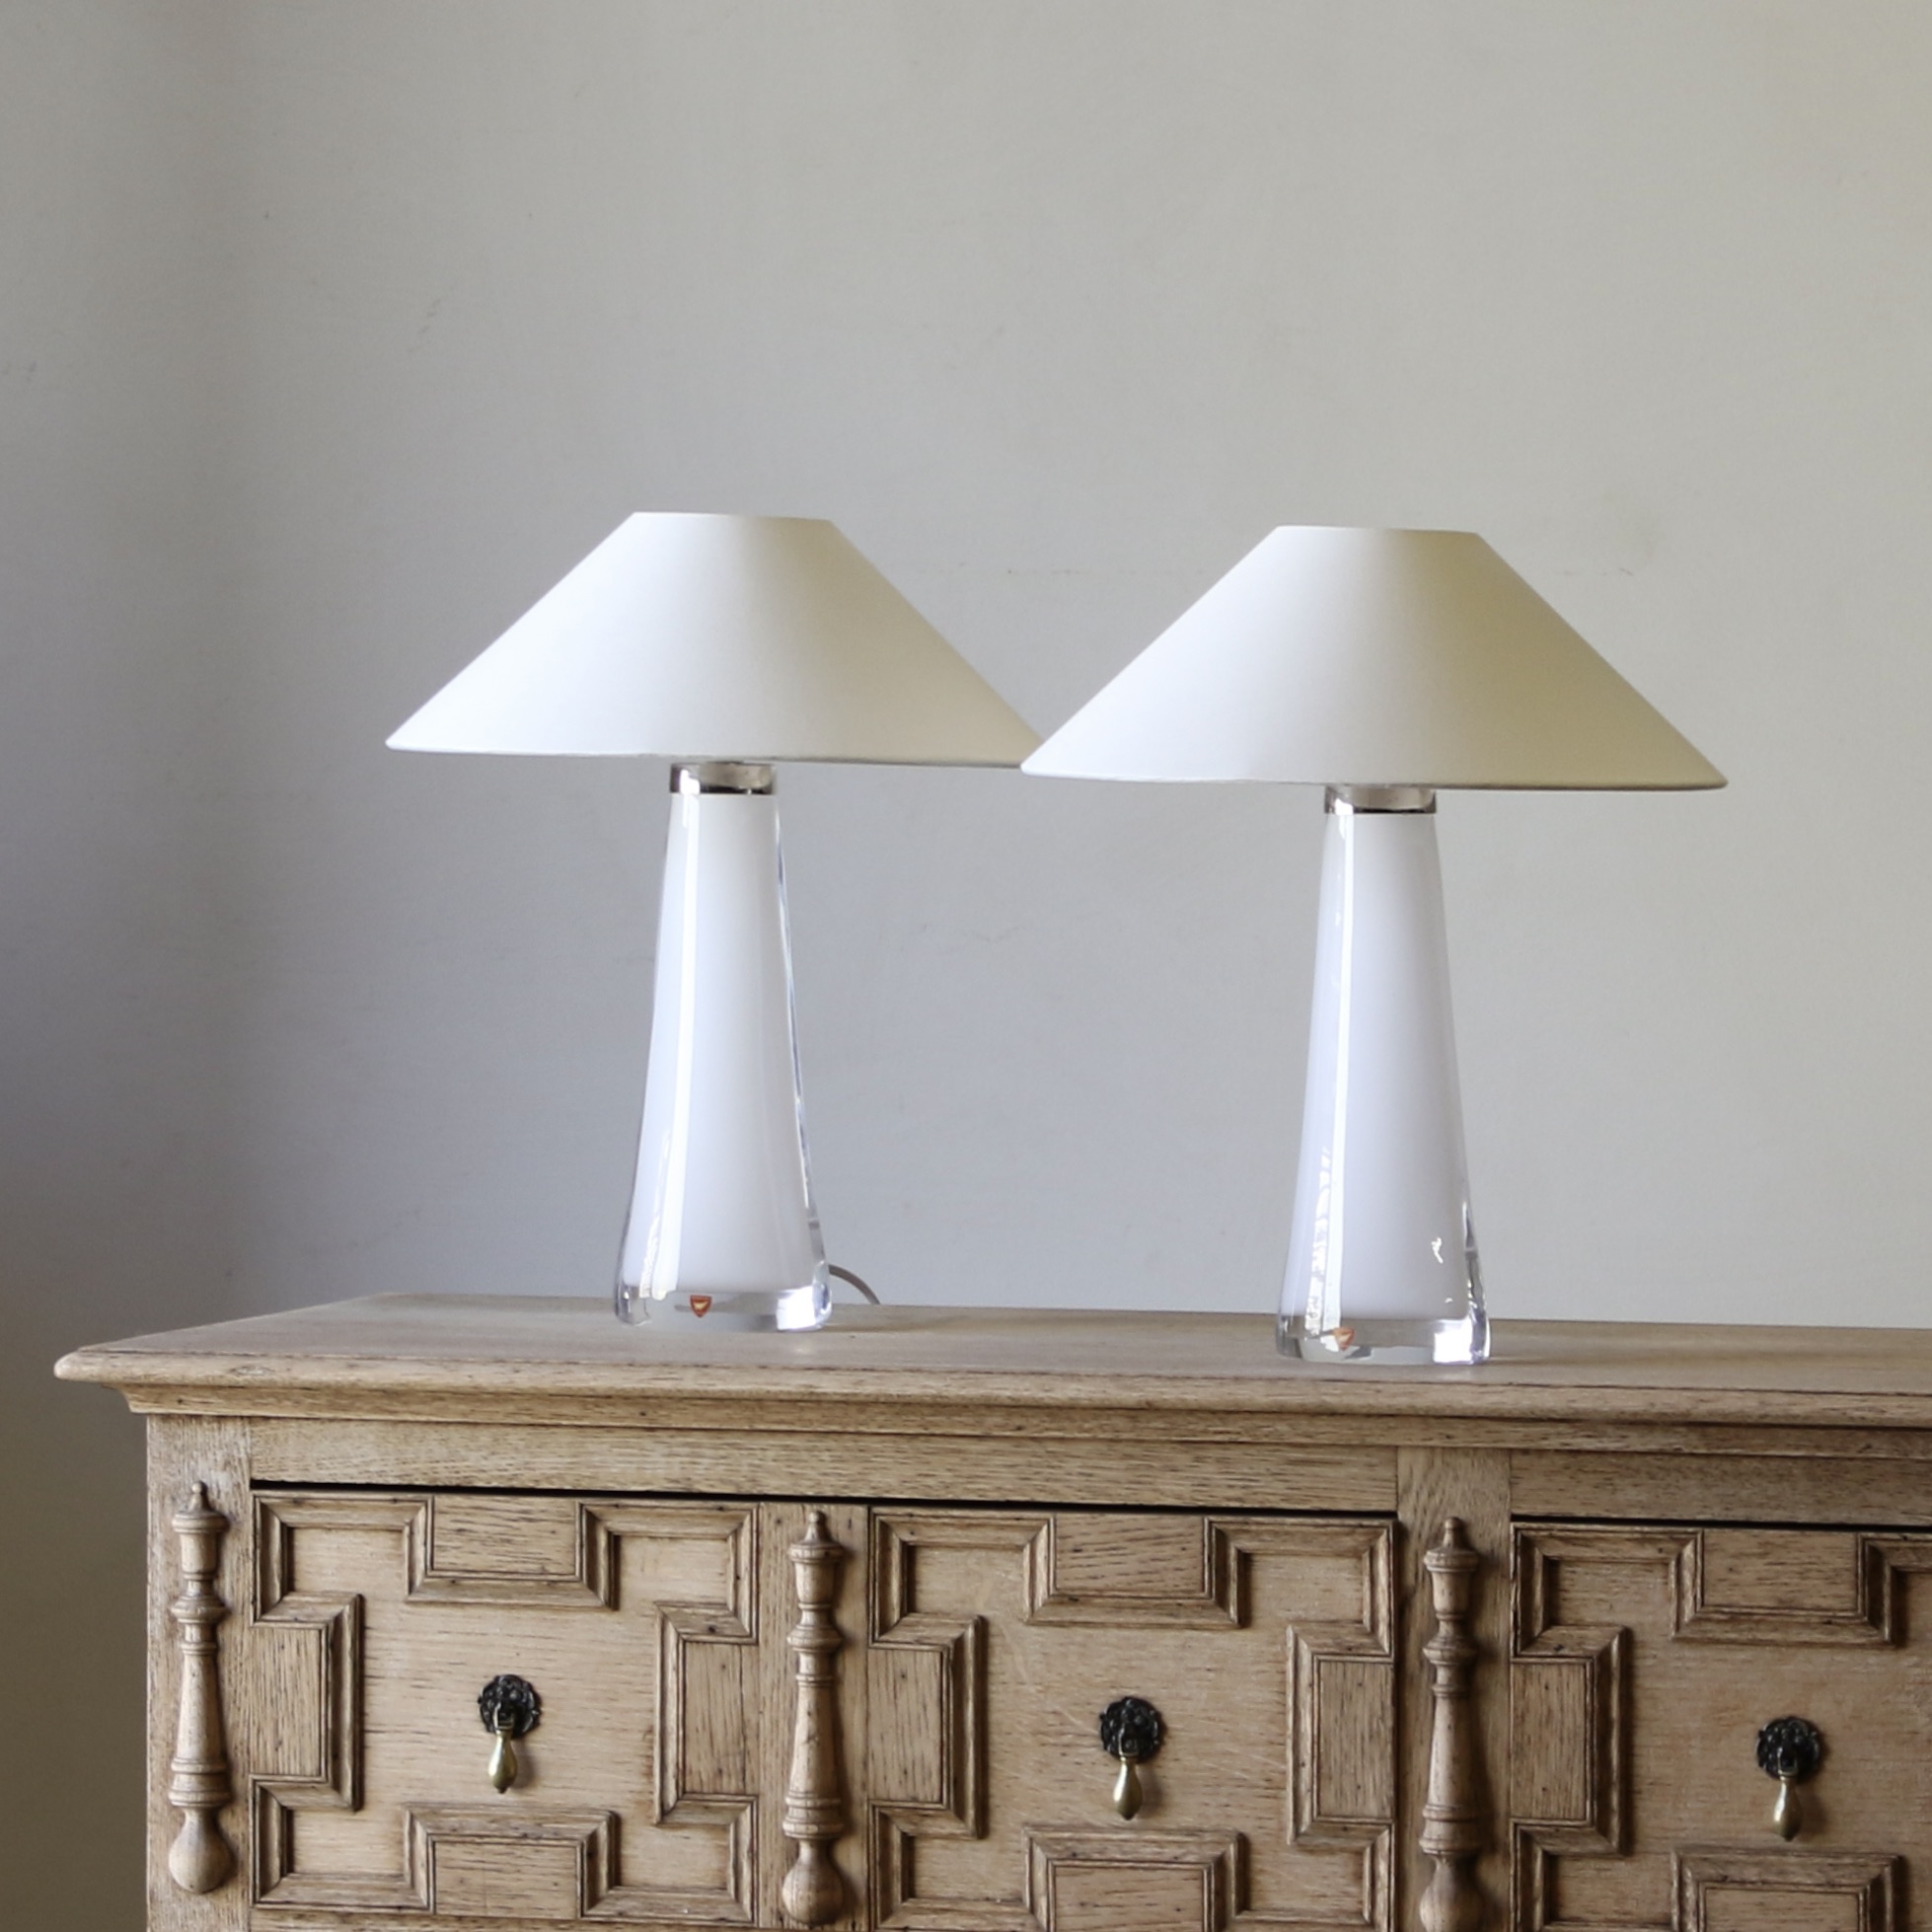 144-12 - Pair of Swedish Lamps by Orrefors